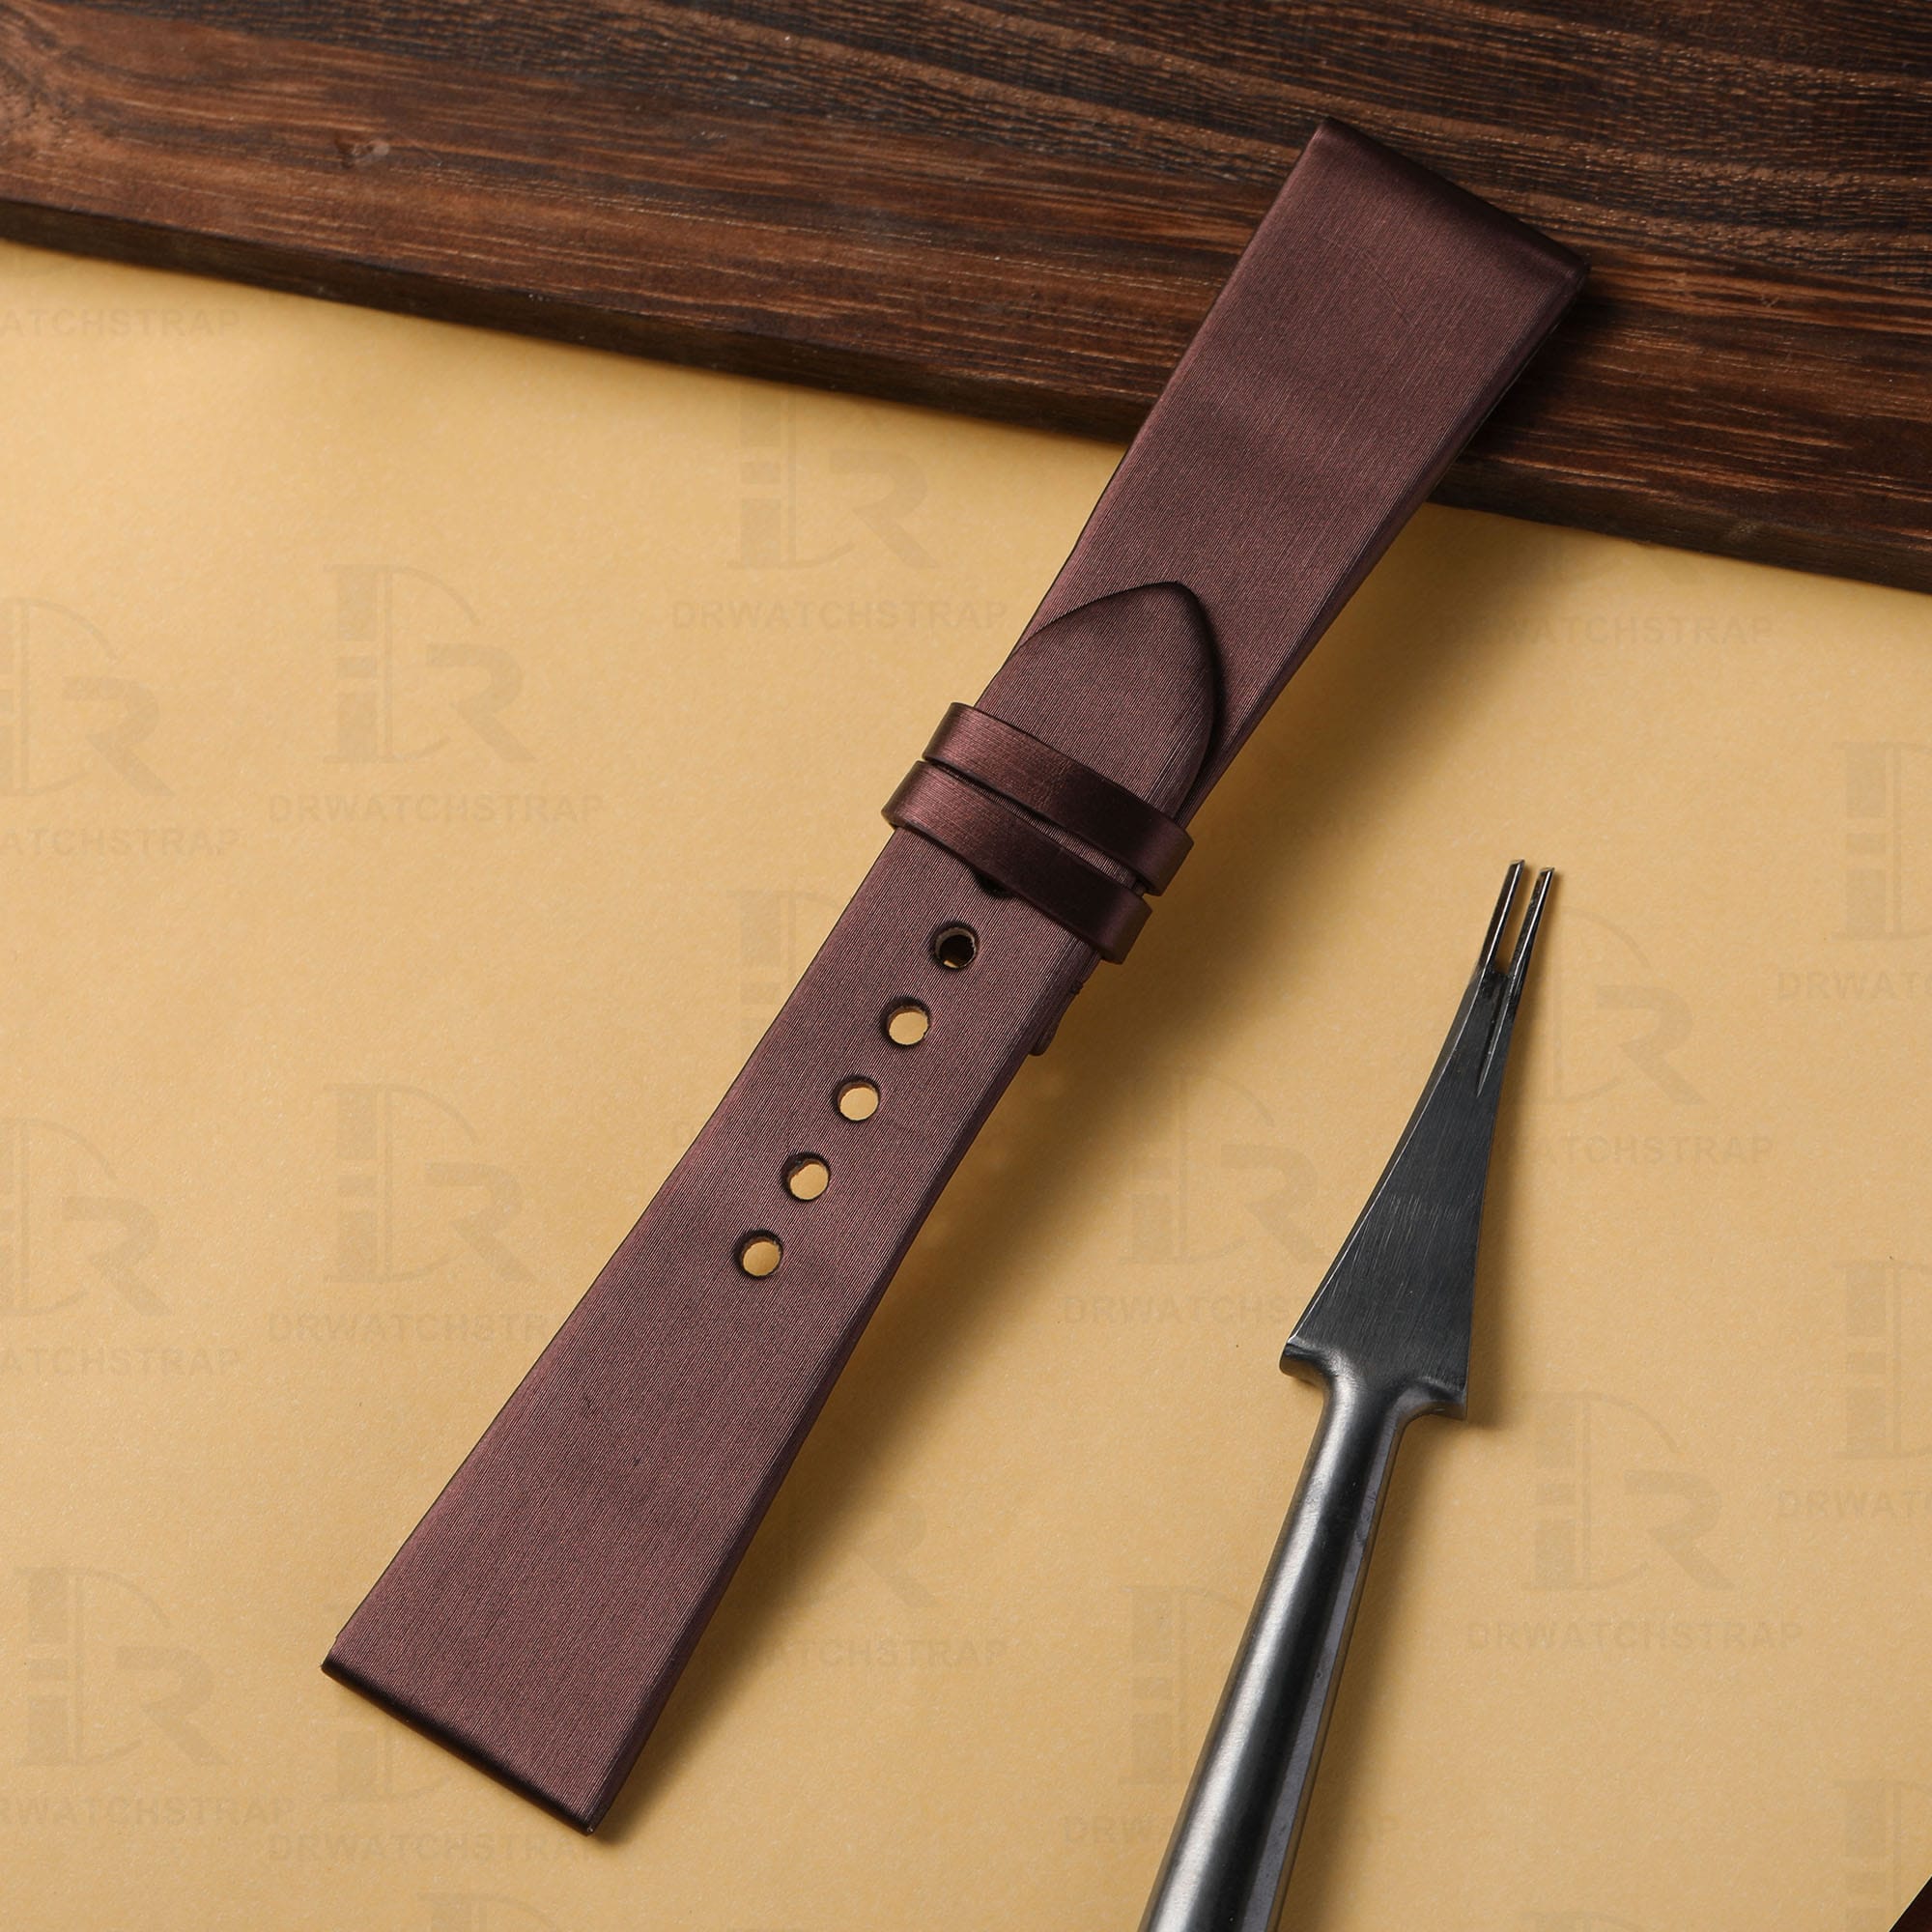 Genuine best quality OEM custom Cartier Tank Divan Brown satin leather watch strap & watch band replacement with best satin material for Cartier Tank Divan men's and ladies' watches online from DR watchstrap - Shop the premium satin watch straps and watchbands 24mm for sale at a low price